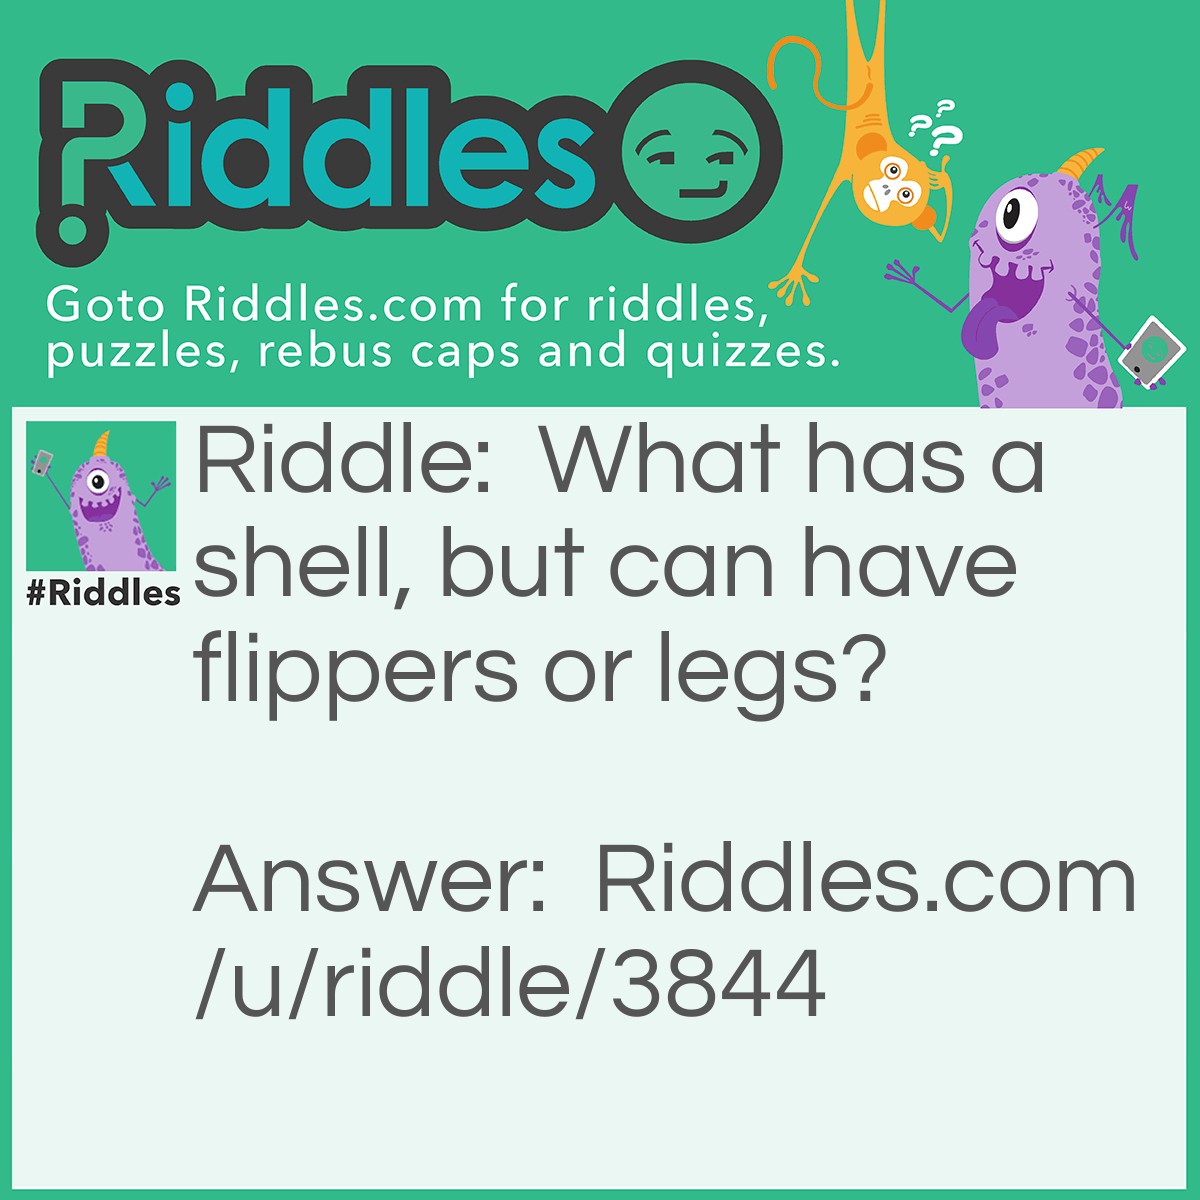 Riddle: What has a shell, but can have flippers or legs? Answer: A turtle.